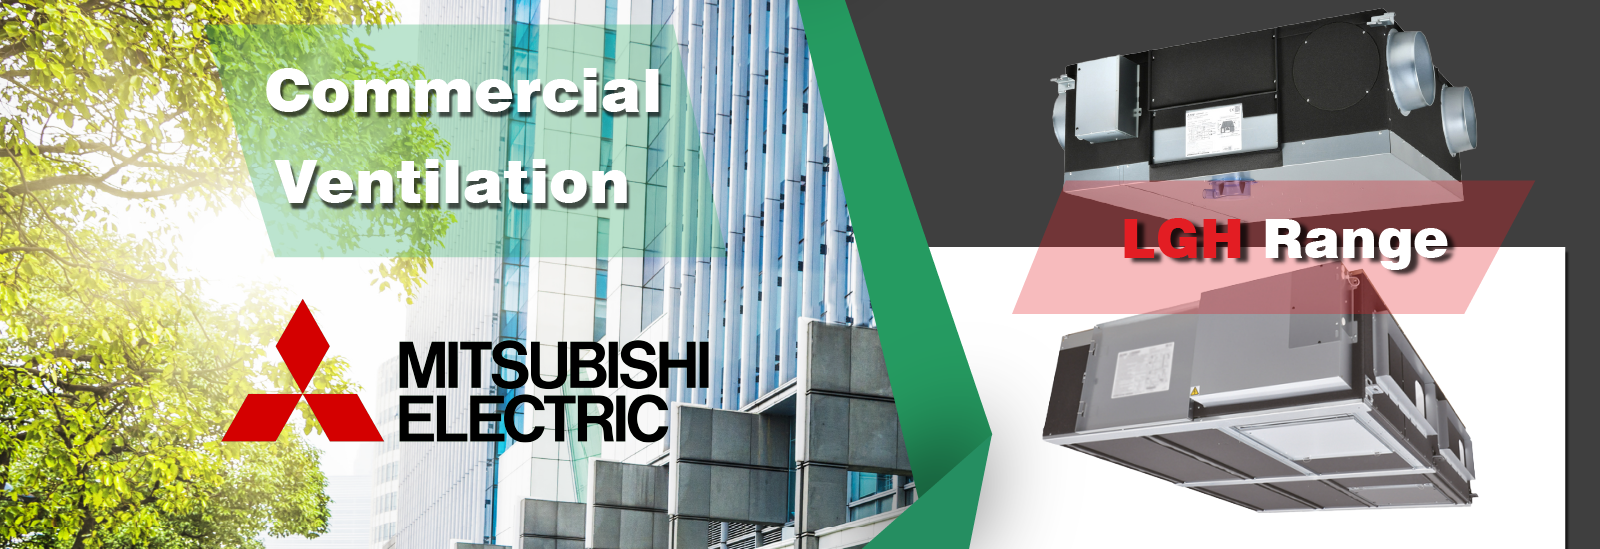 An In-depth Look at the Mitsubishi Lossnay Commercial Ventilation